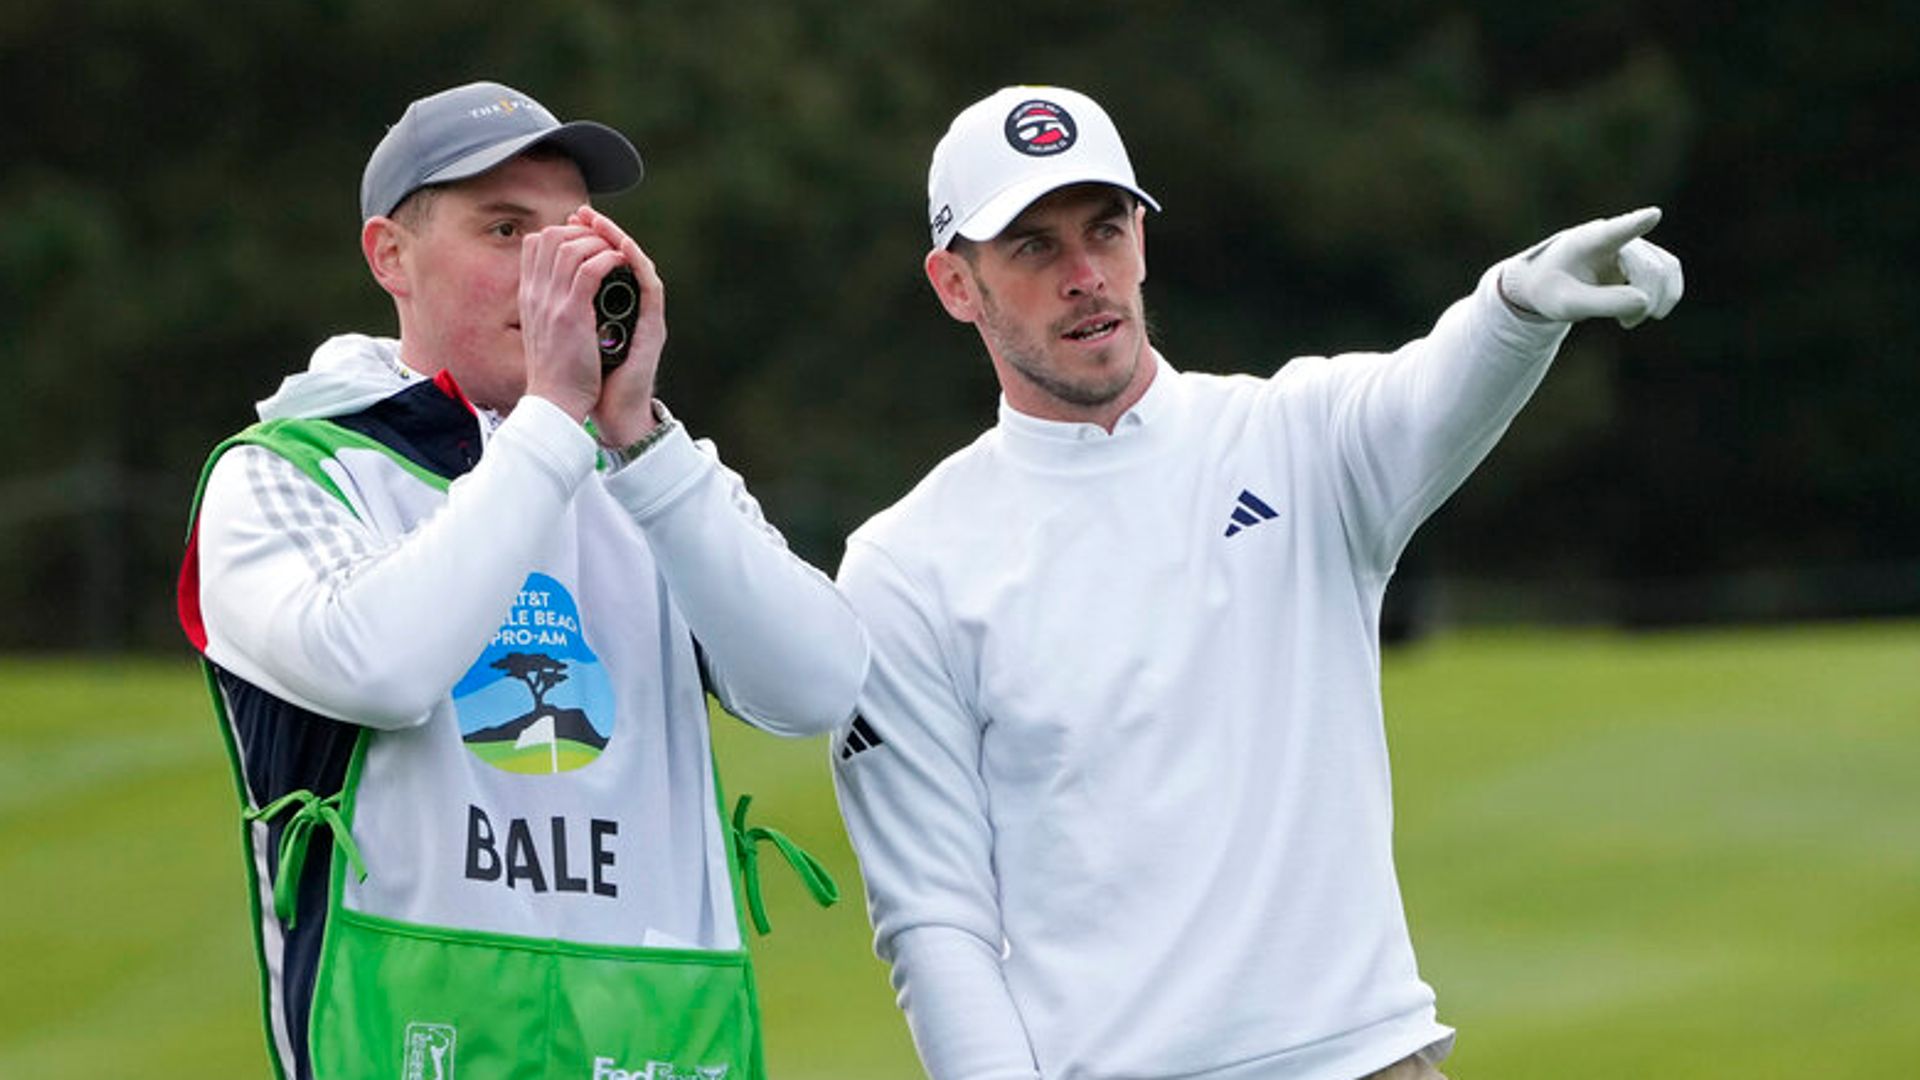 Gareth Bale admits suffering first-tee nerves but impresses at AT&T Pebble  Beach Pro-Am | Golf News – Xvideos